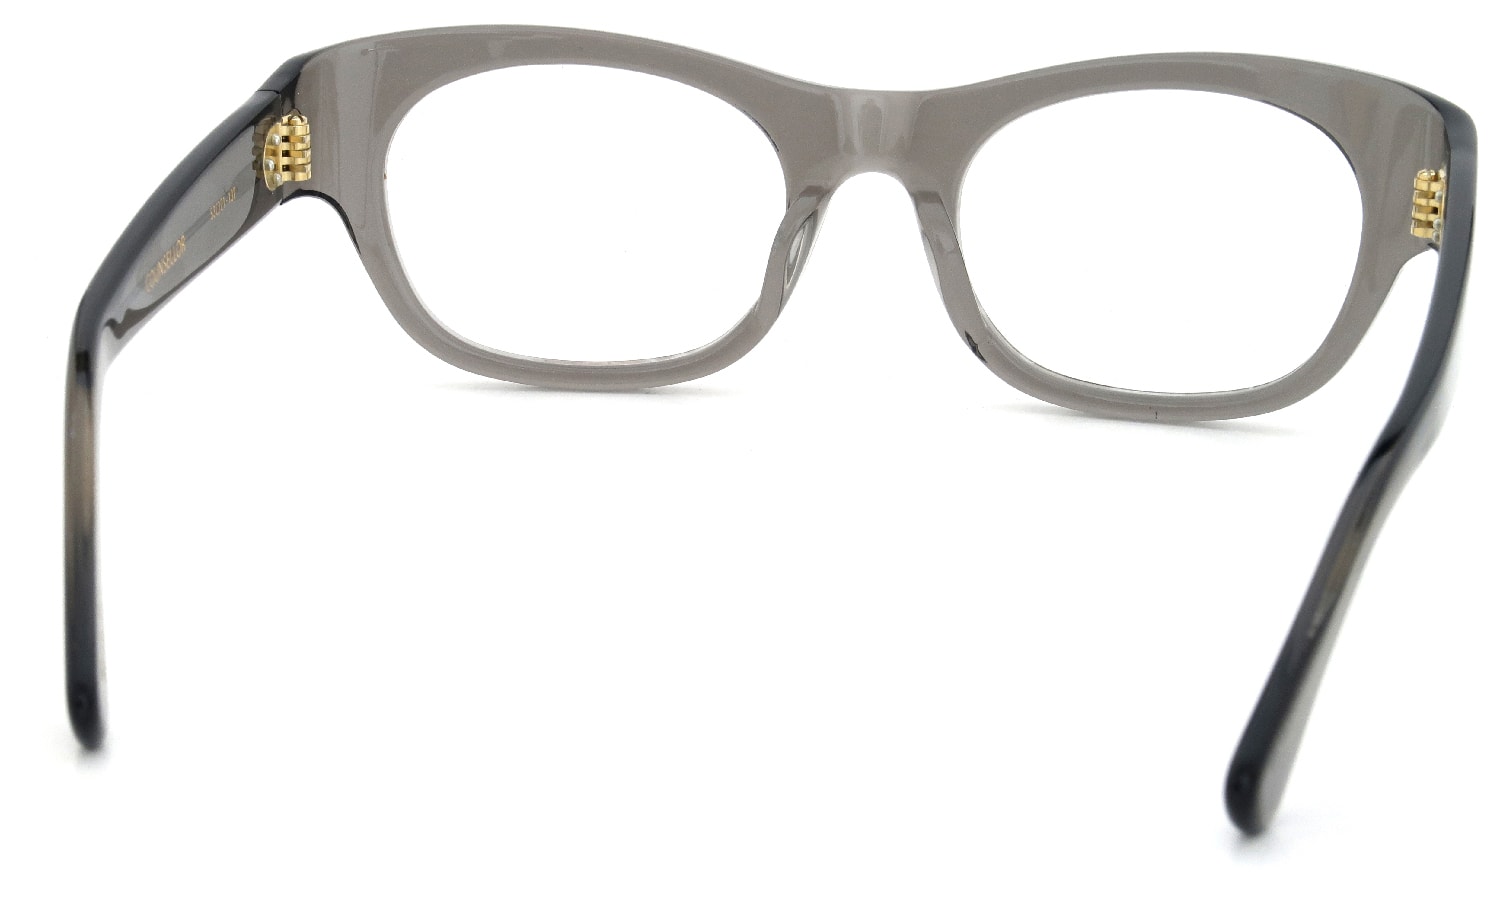 Oliver Goldsmith メガネ通販 COUNSELLOR 53size Cloudy Sky